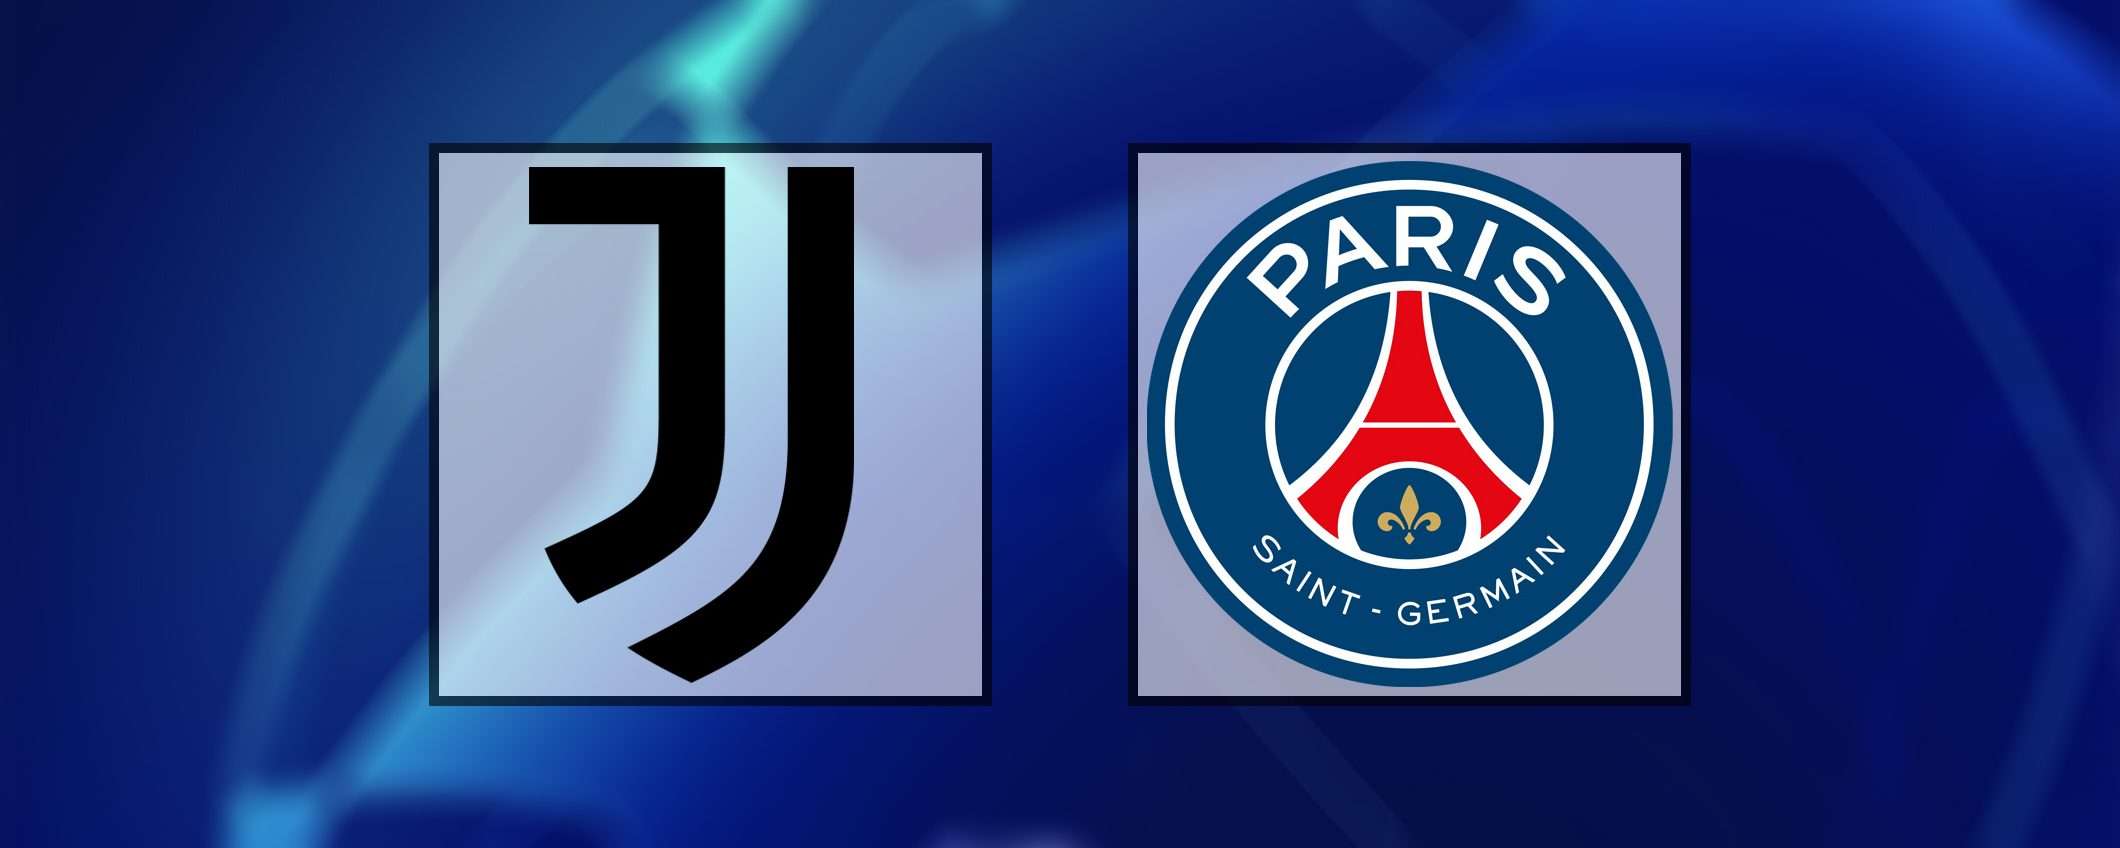 Come vedere Juventus-PSG in streaming (Champions)